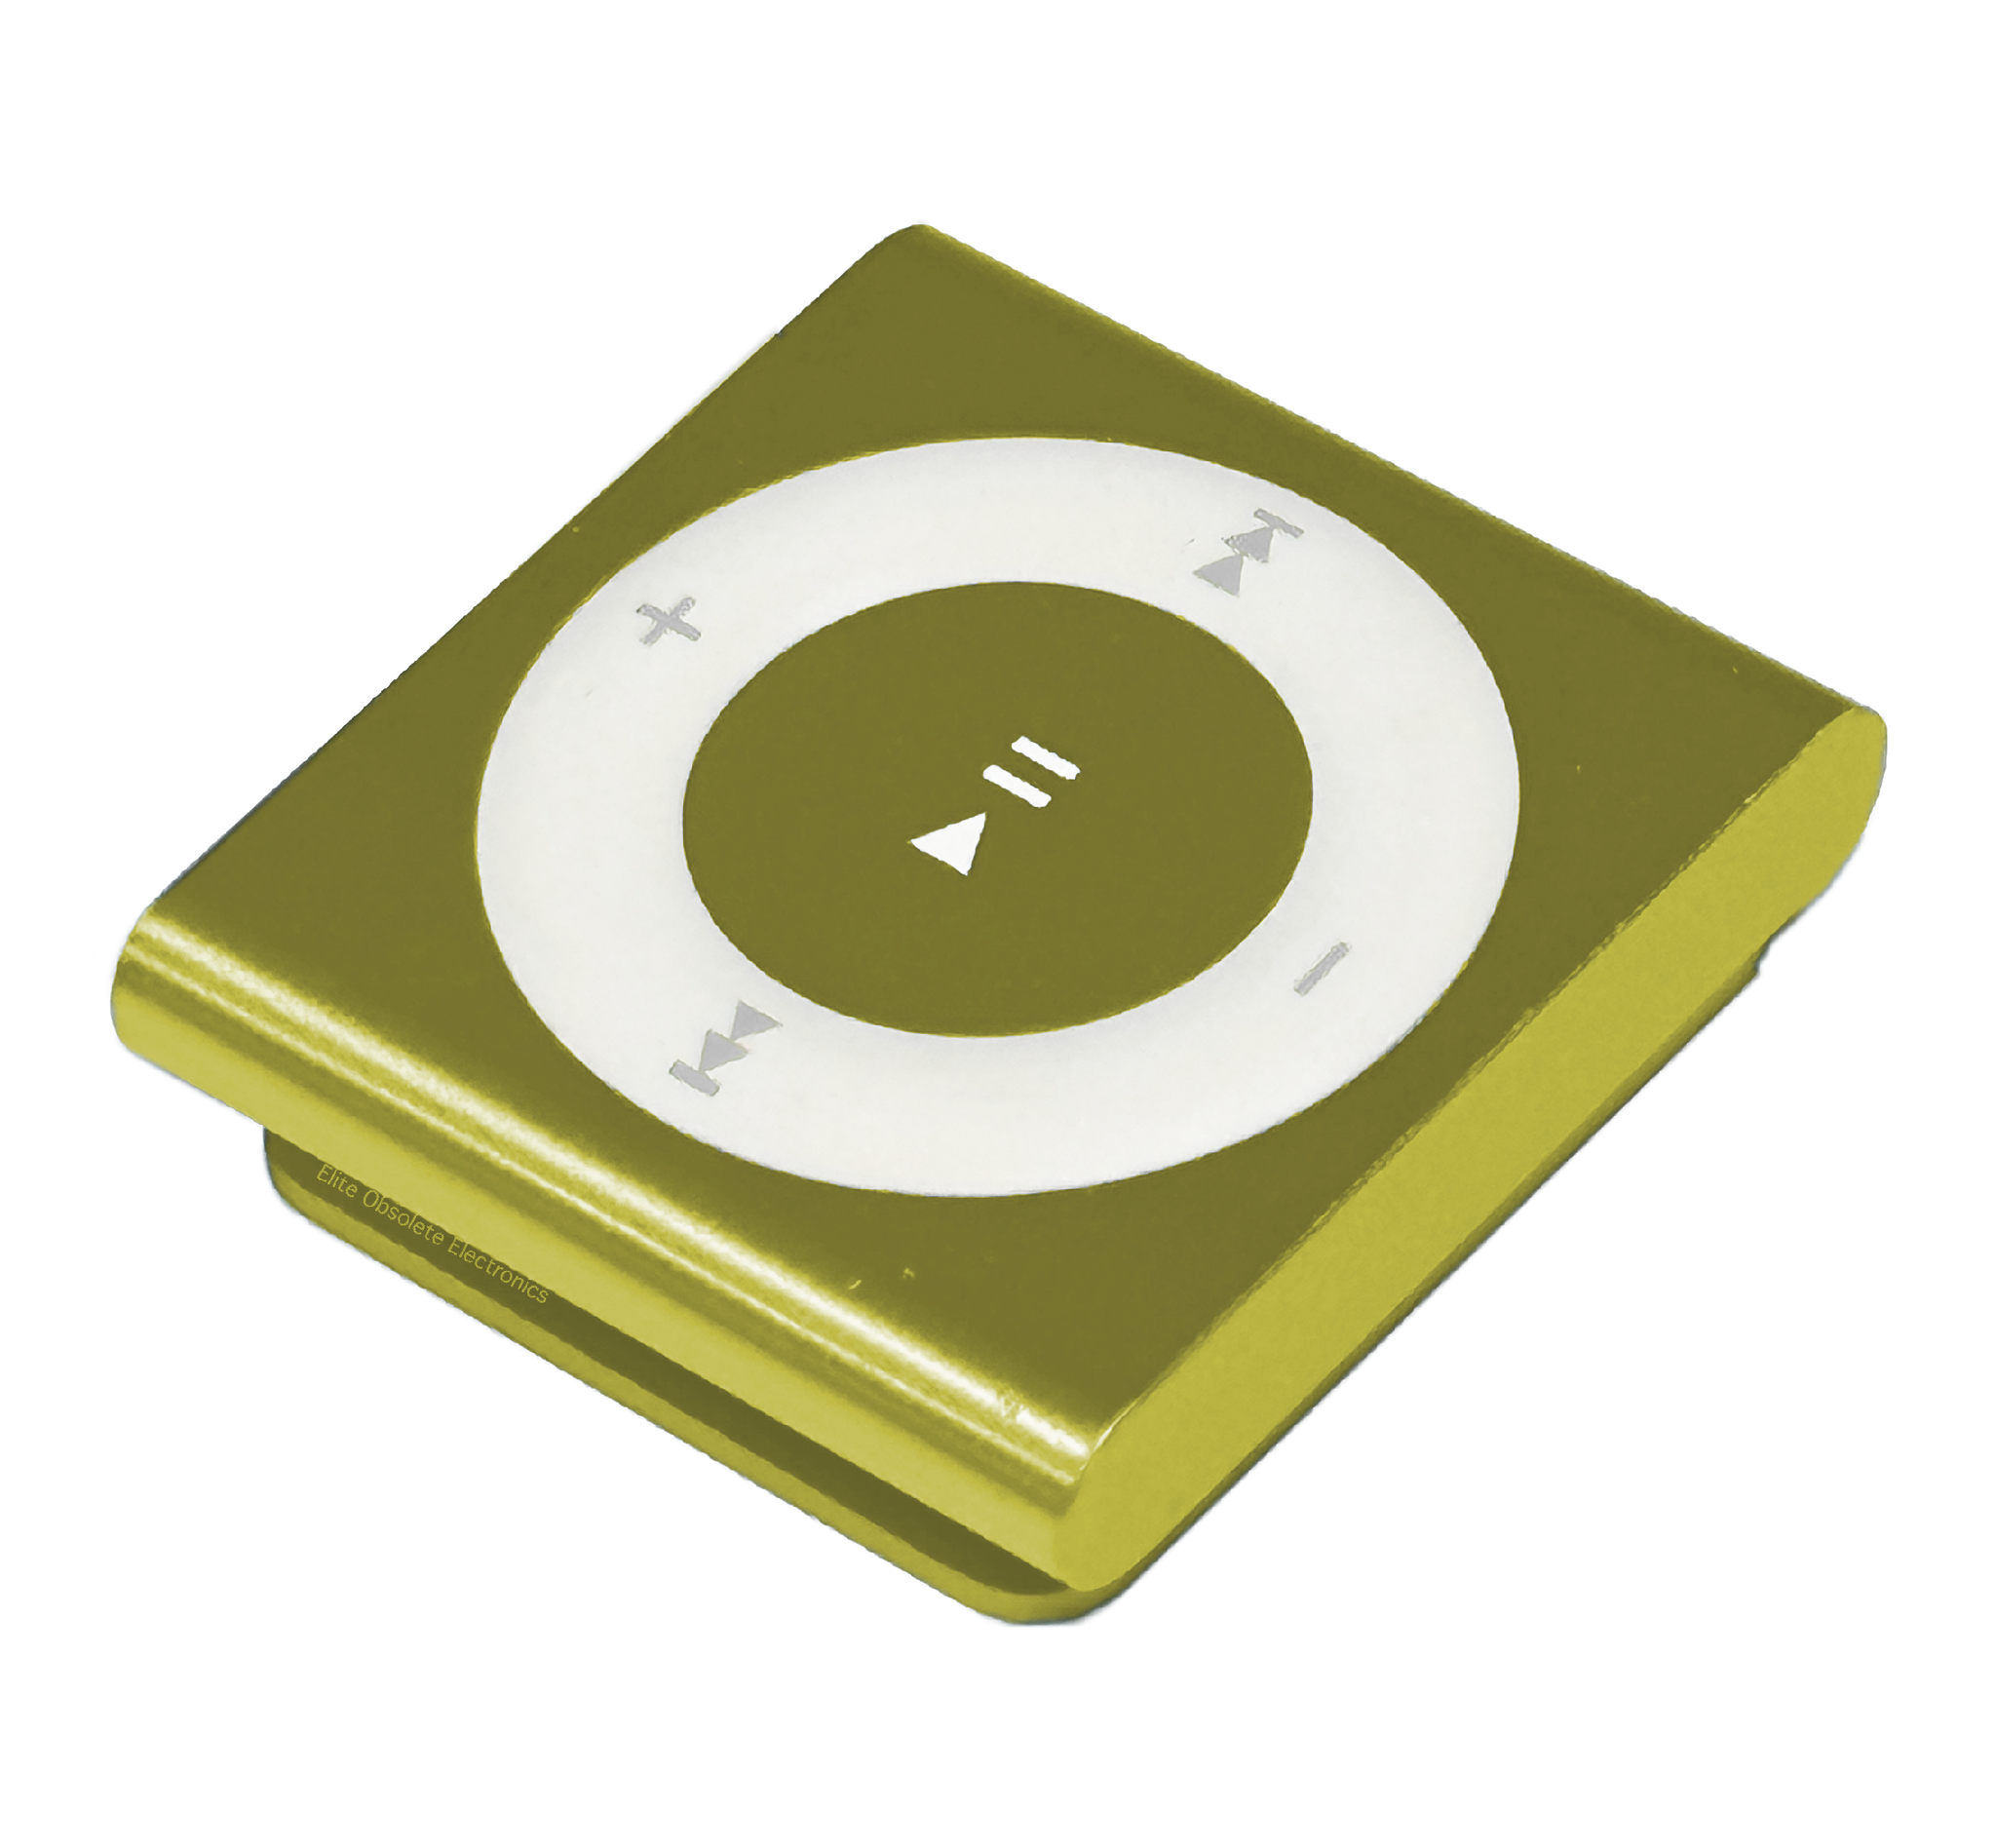 Used Apple iPod Shuffle 4th Generation 2GB Yellow A1373 MD774LL/A